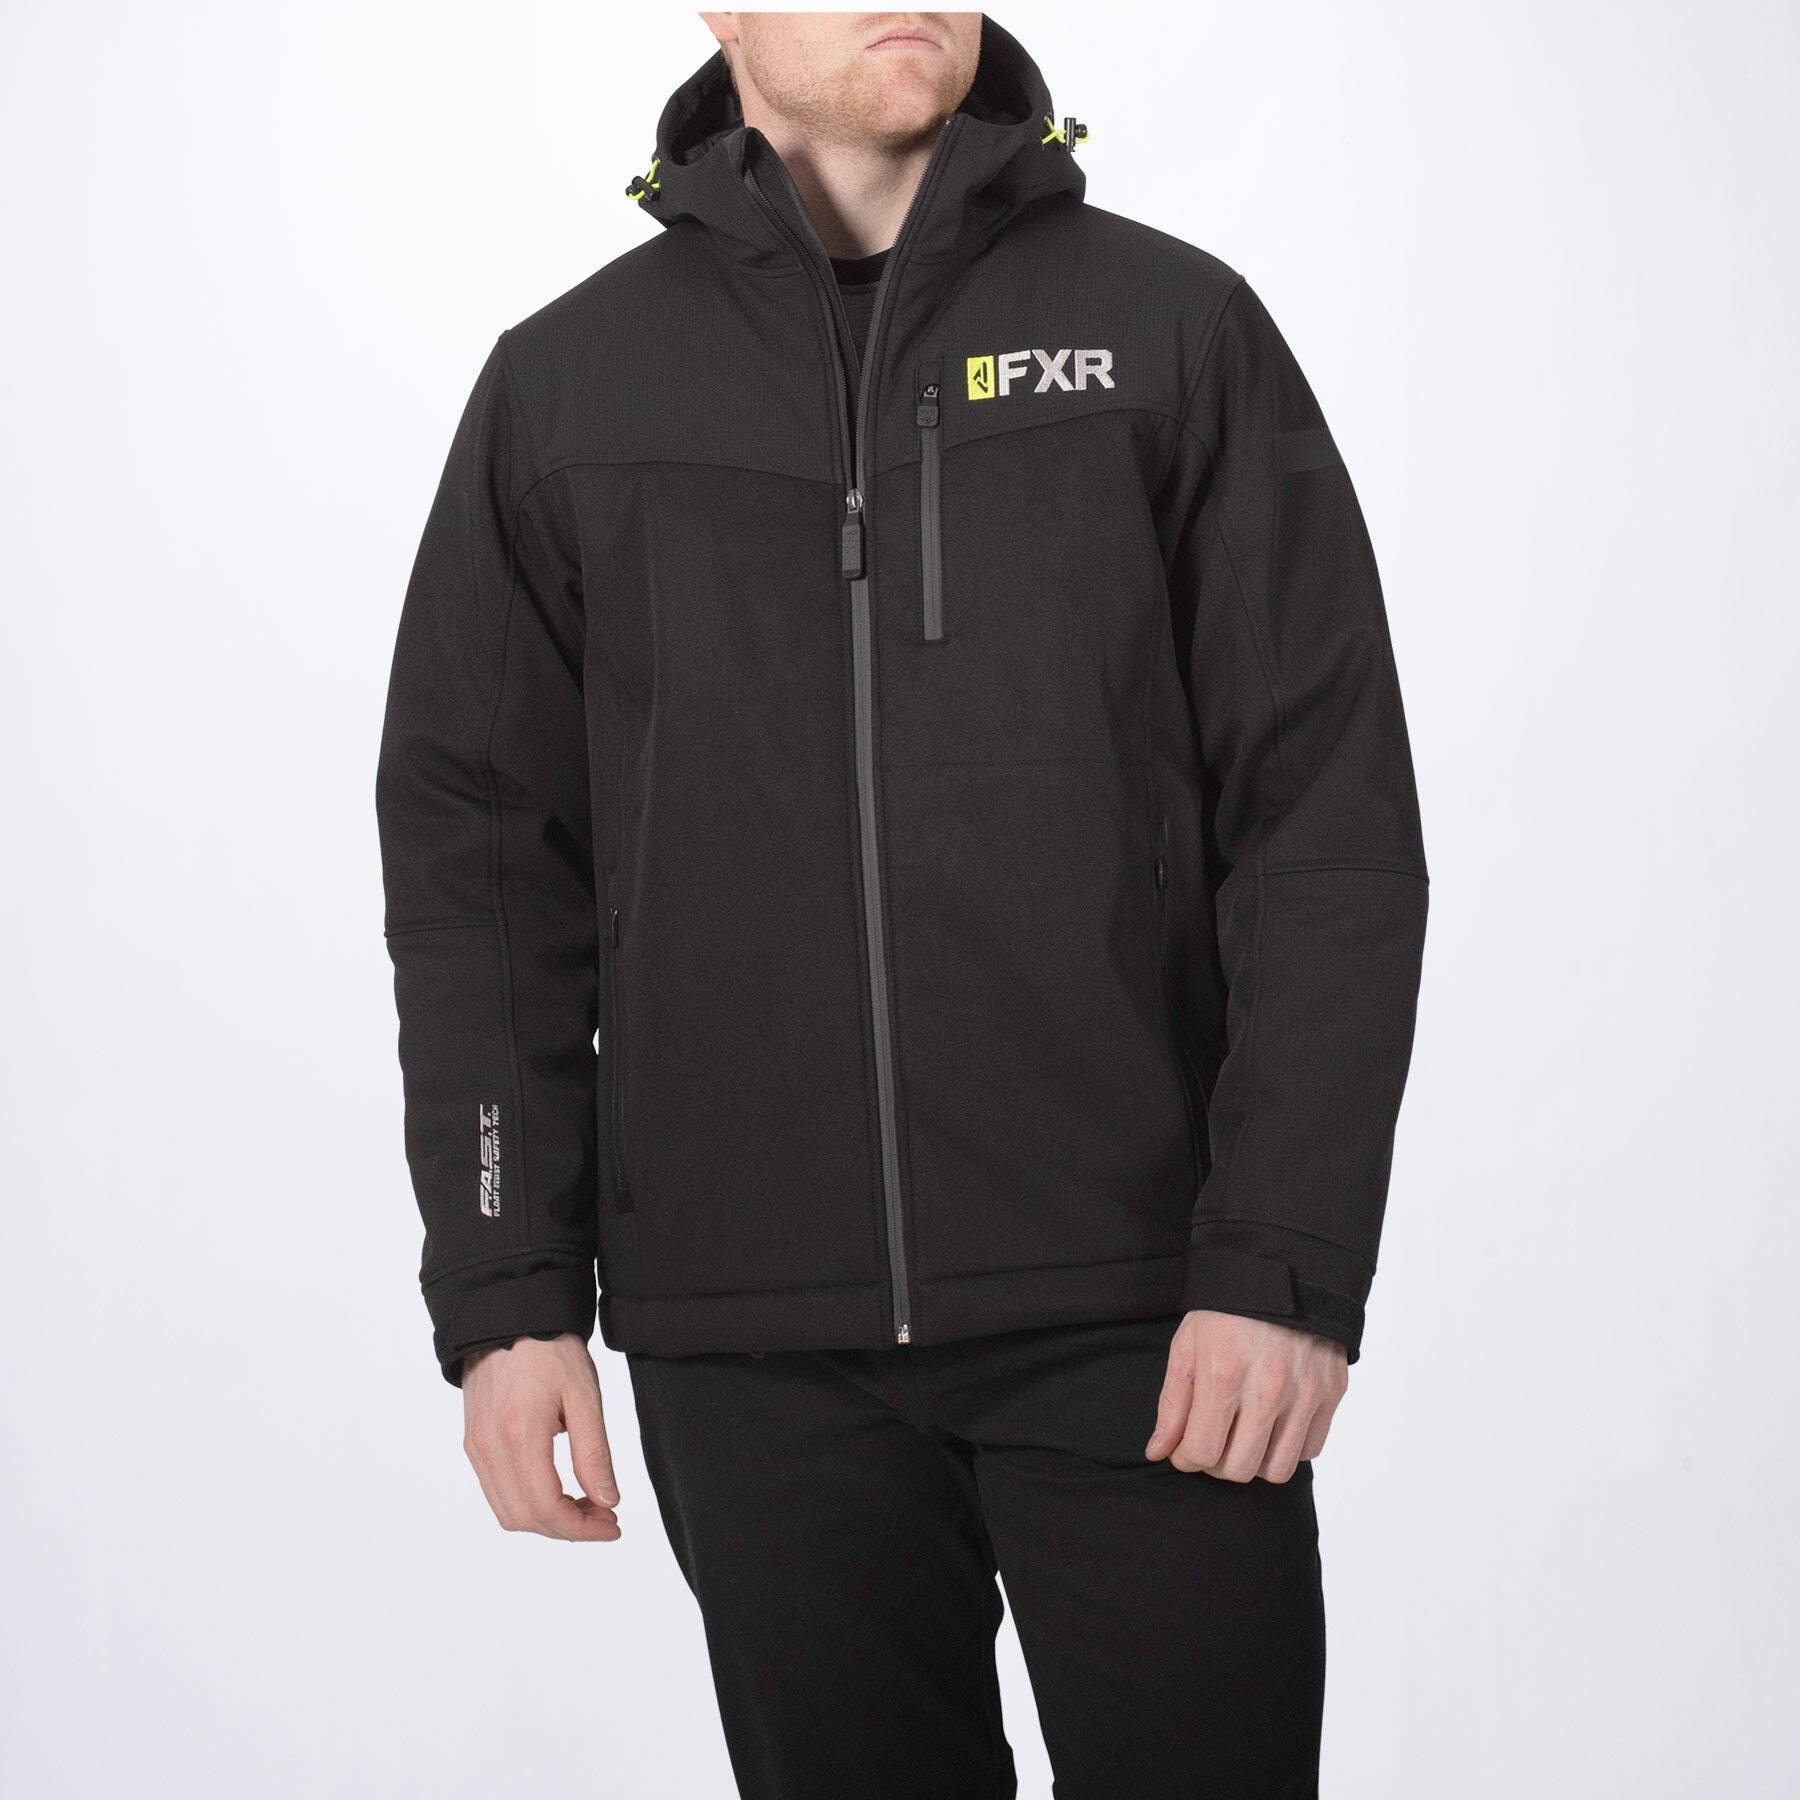 Men's Vertical Pro Insulated Softshell Jacket